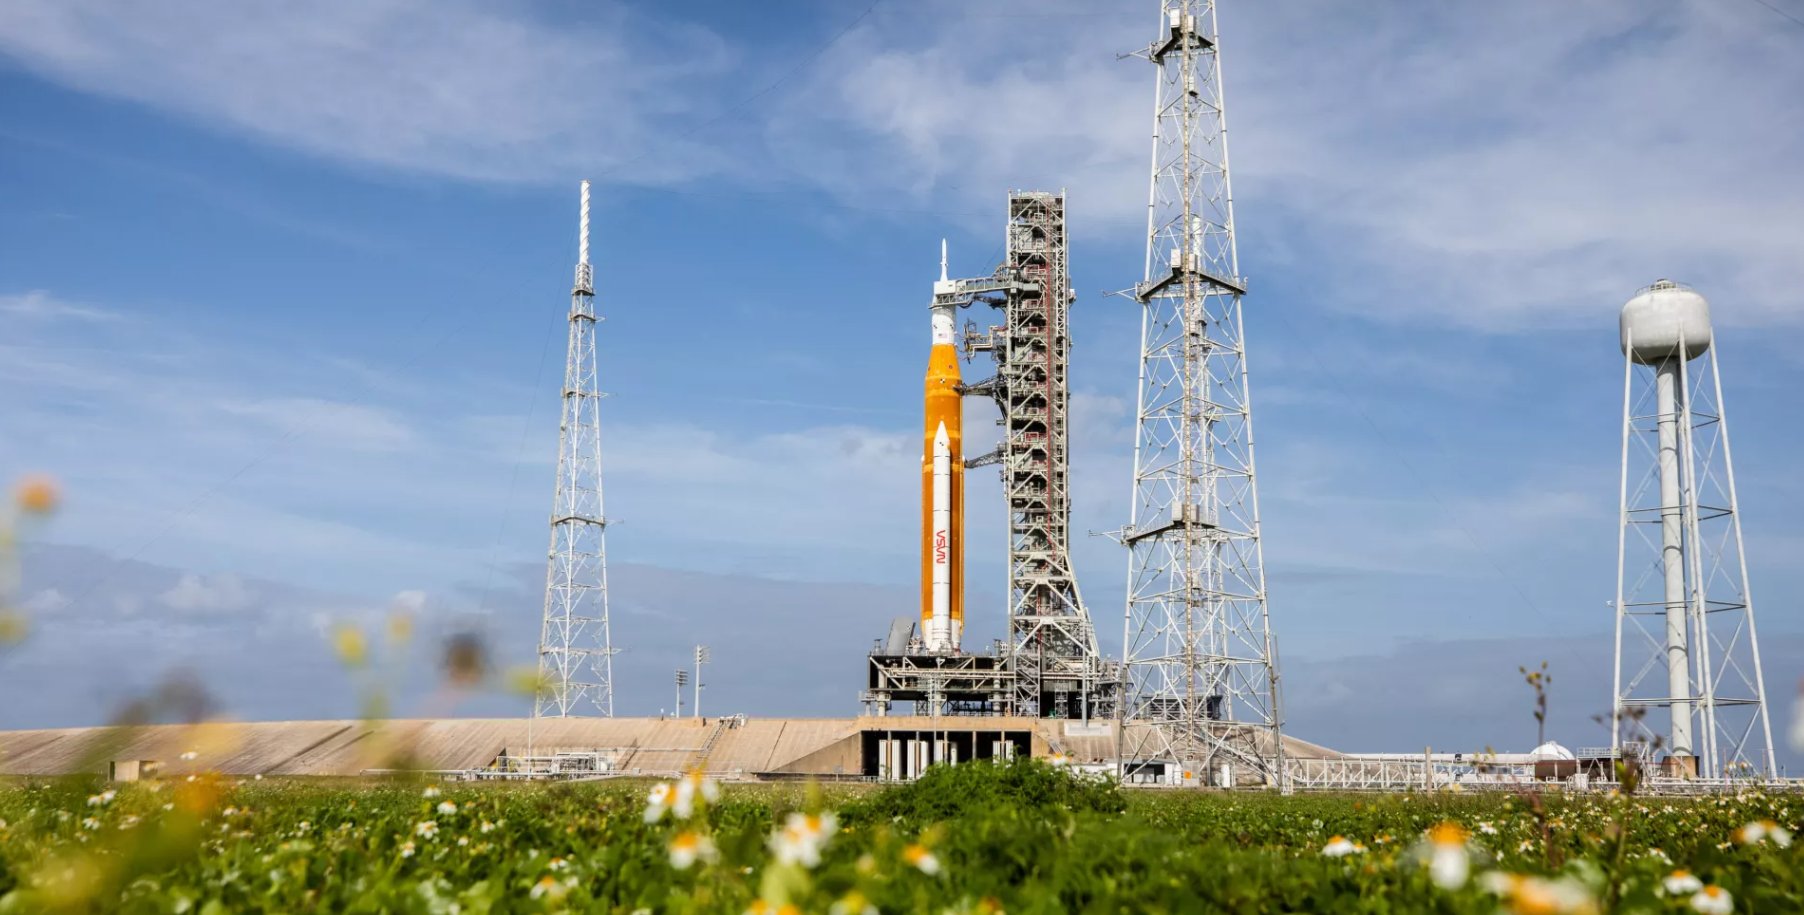 The Science Center is go for launch! Celebrate the Artemis I launch with FREE admission and a launch livestream with NASA TV